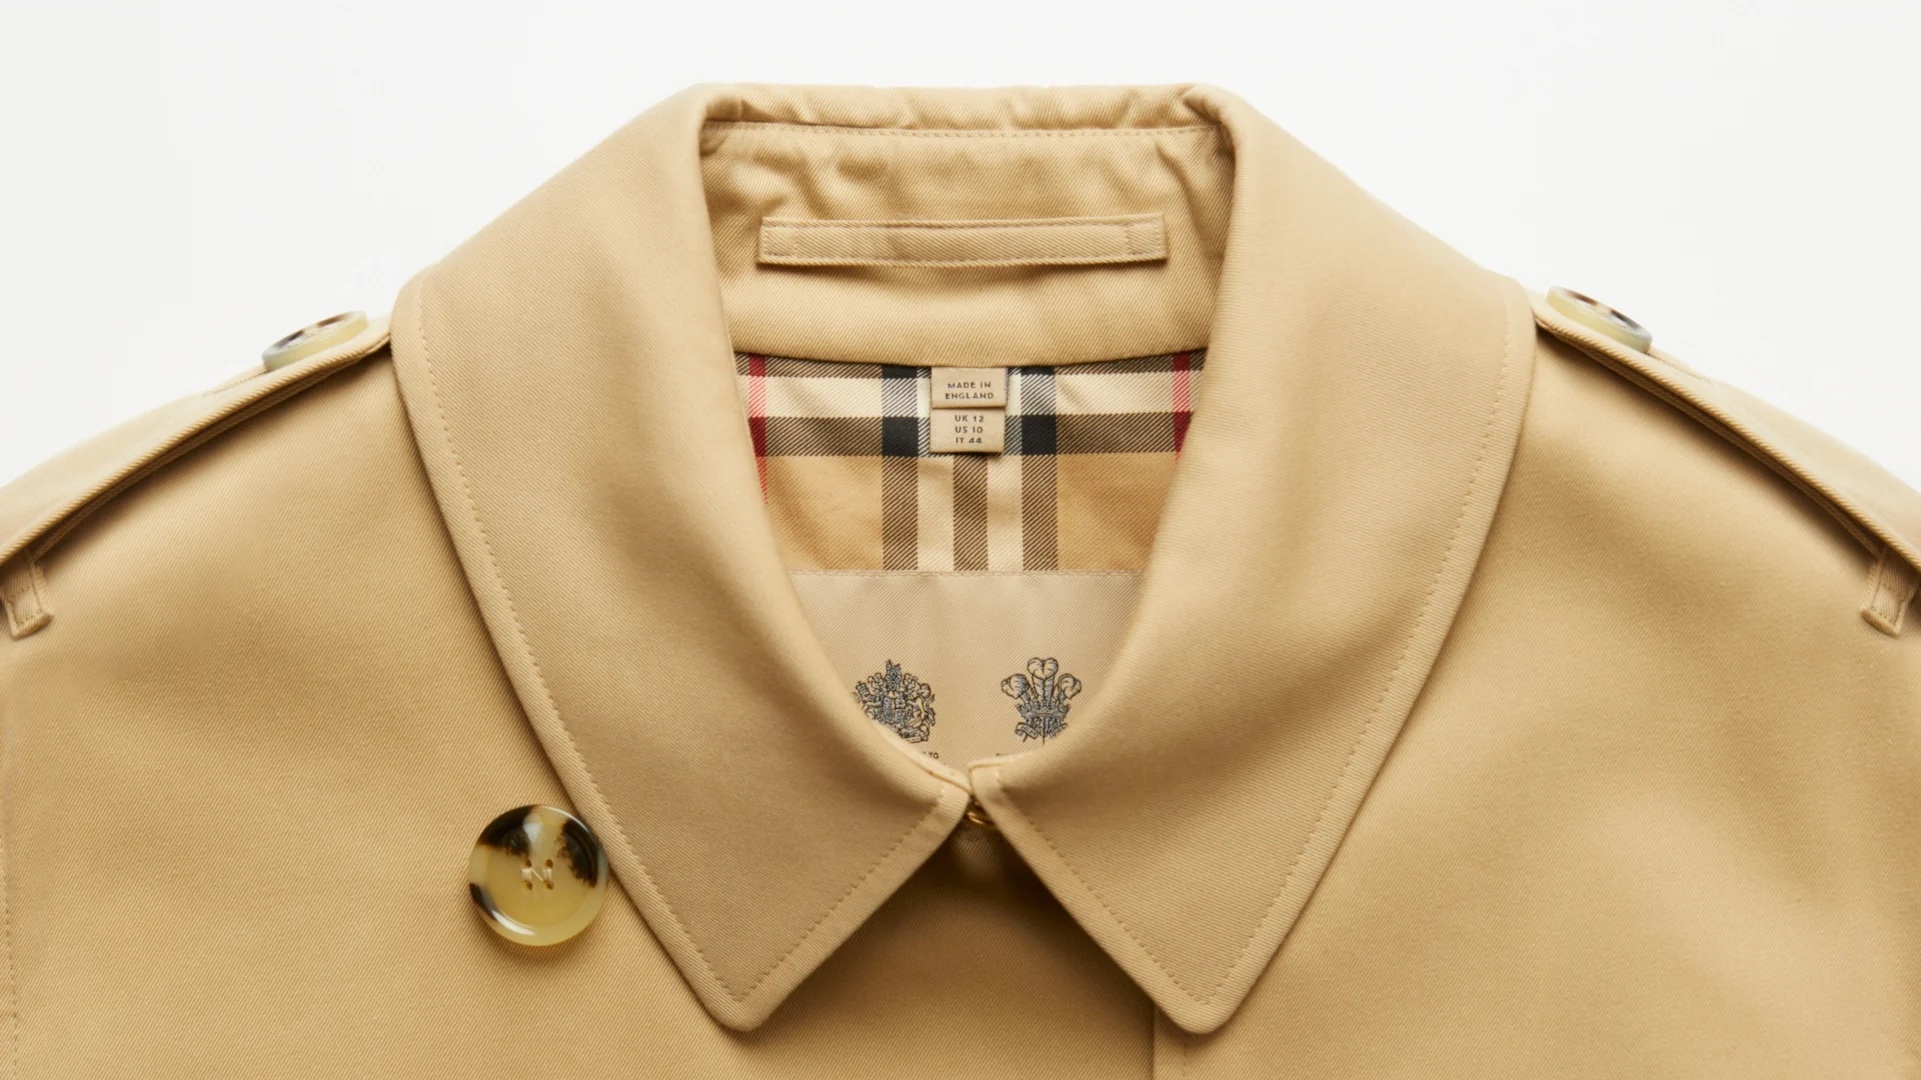 Burberry launches take back scheme with Vestiaire Collective - Internet  Retailing